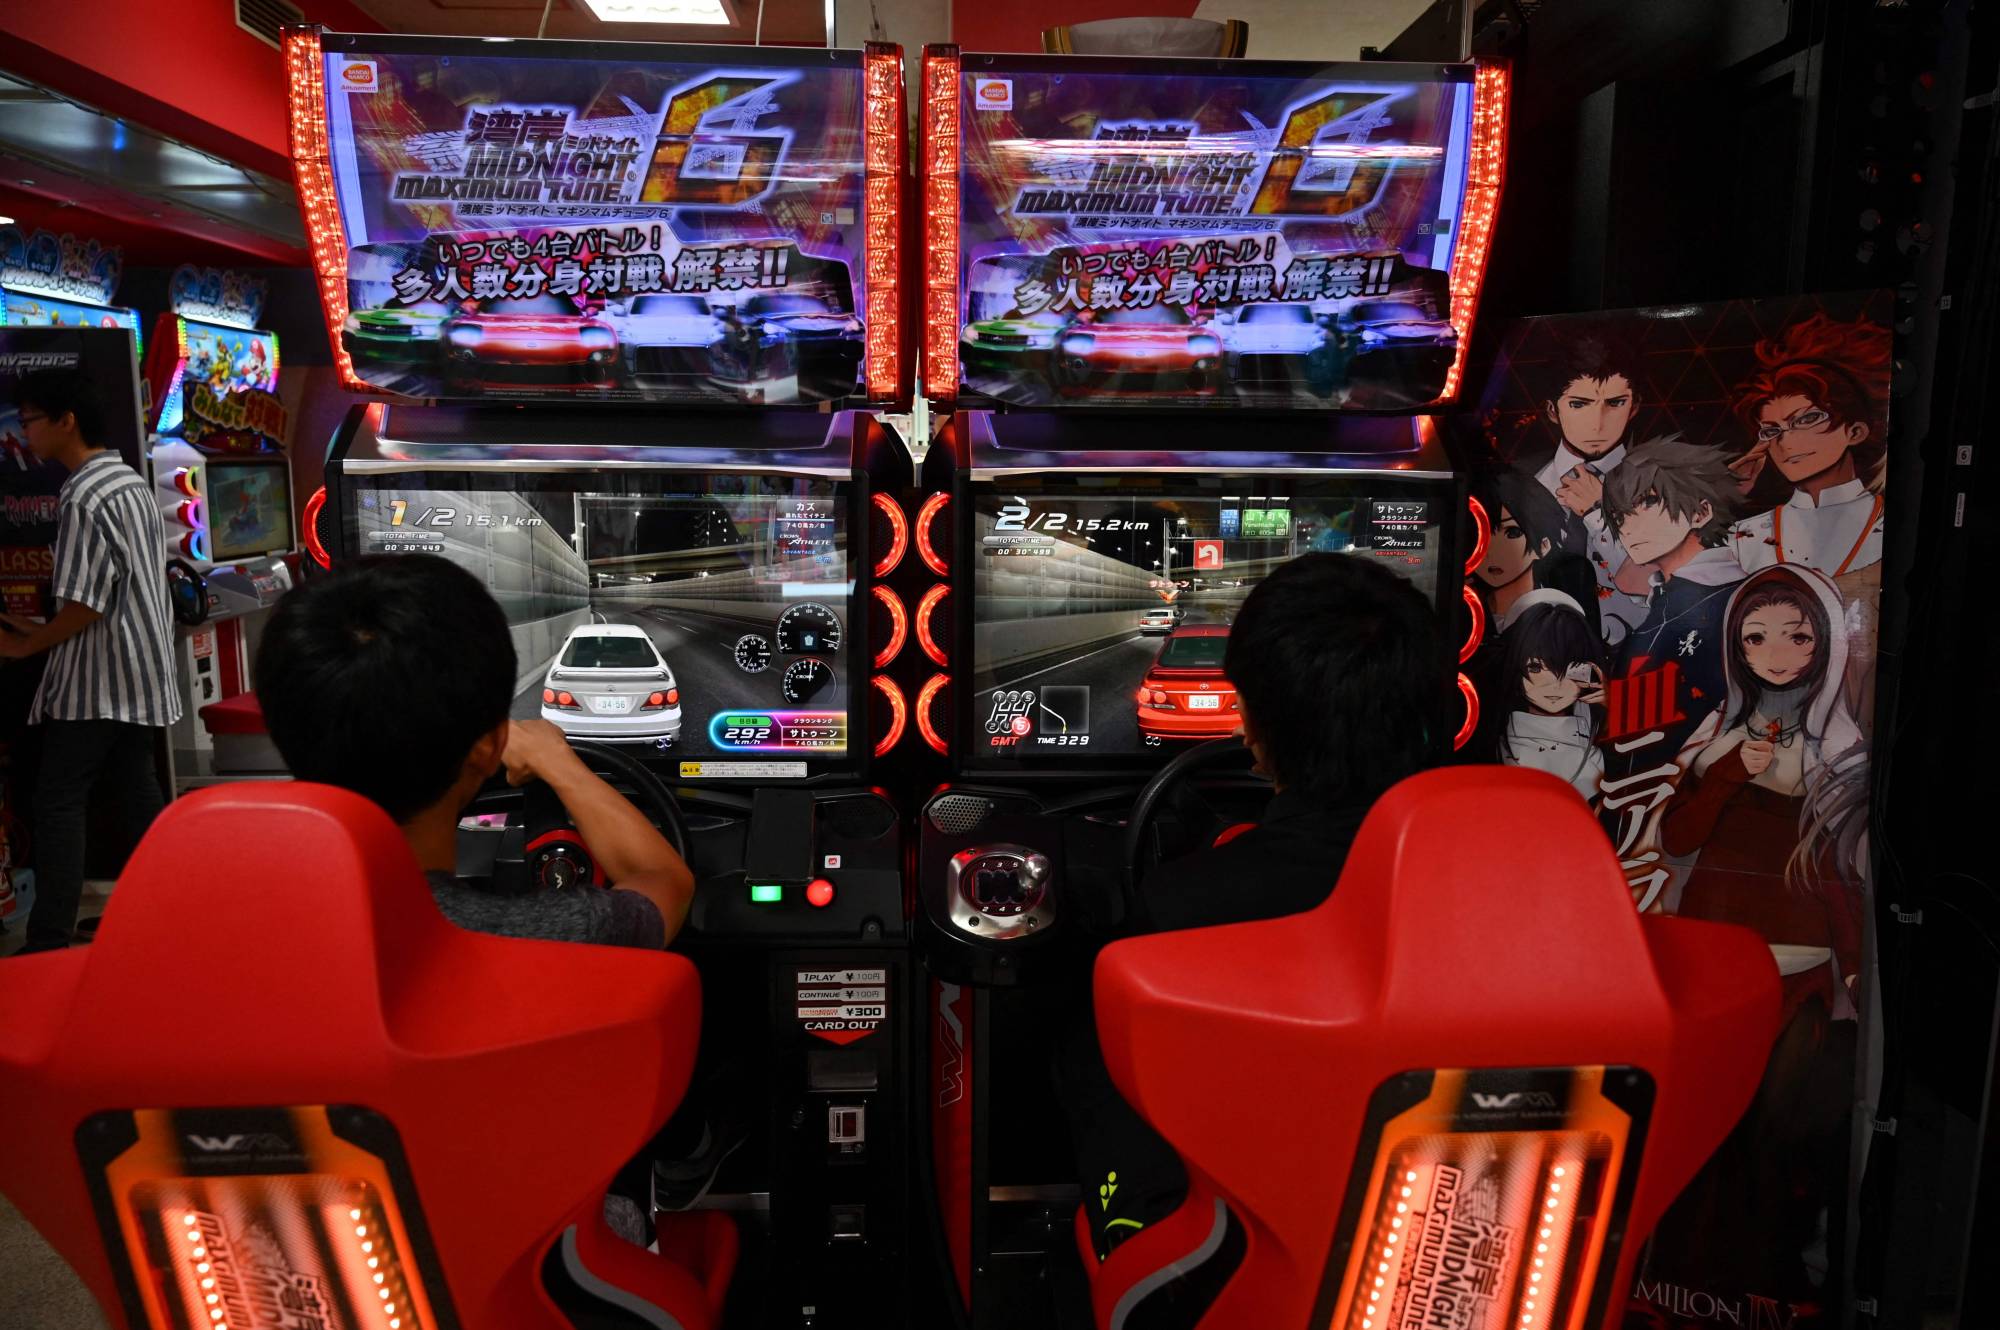 China keeping 1 hour daily limit on kids' online games